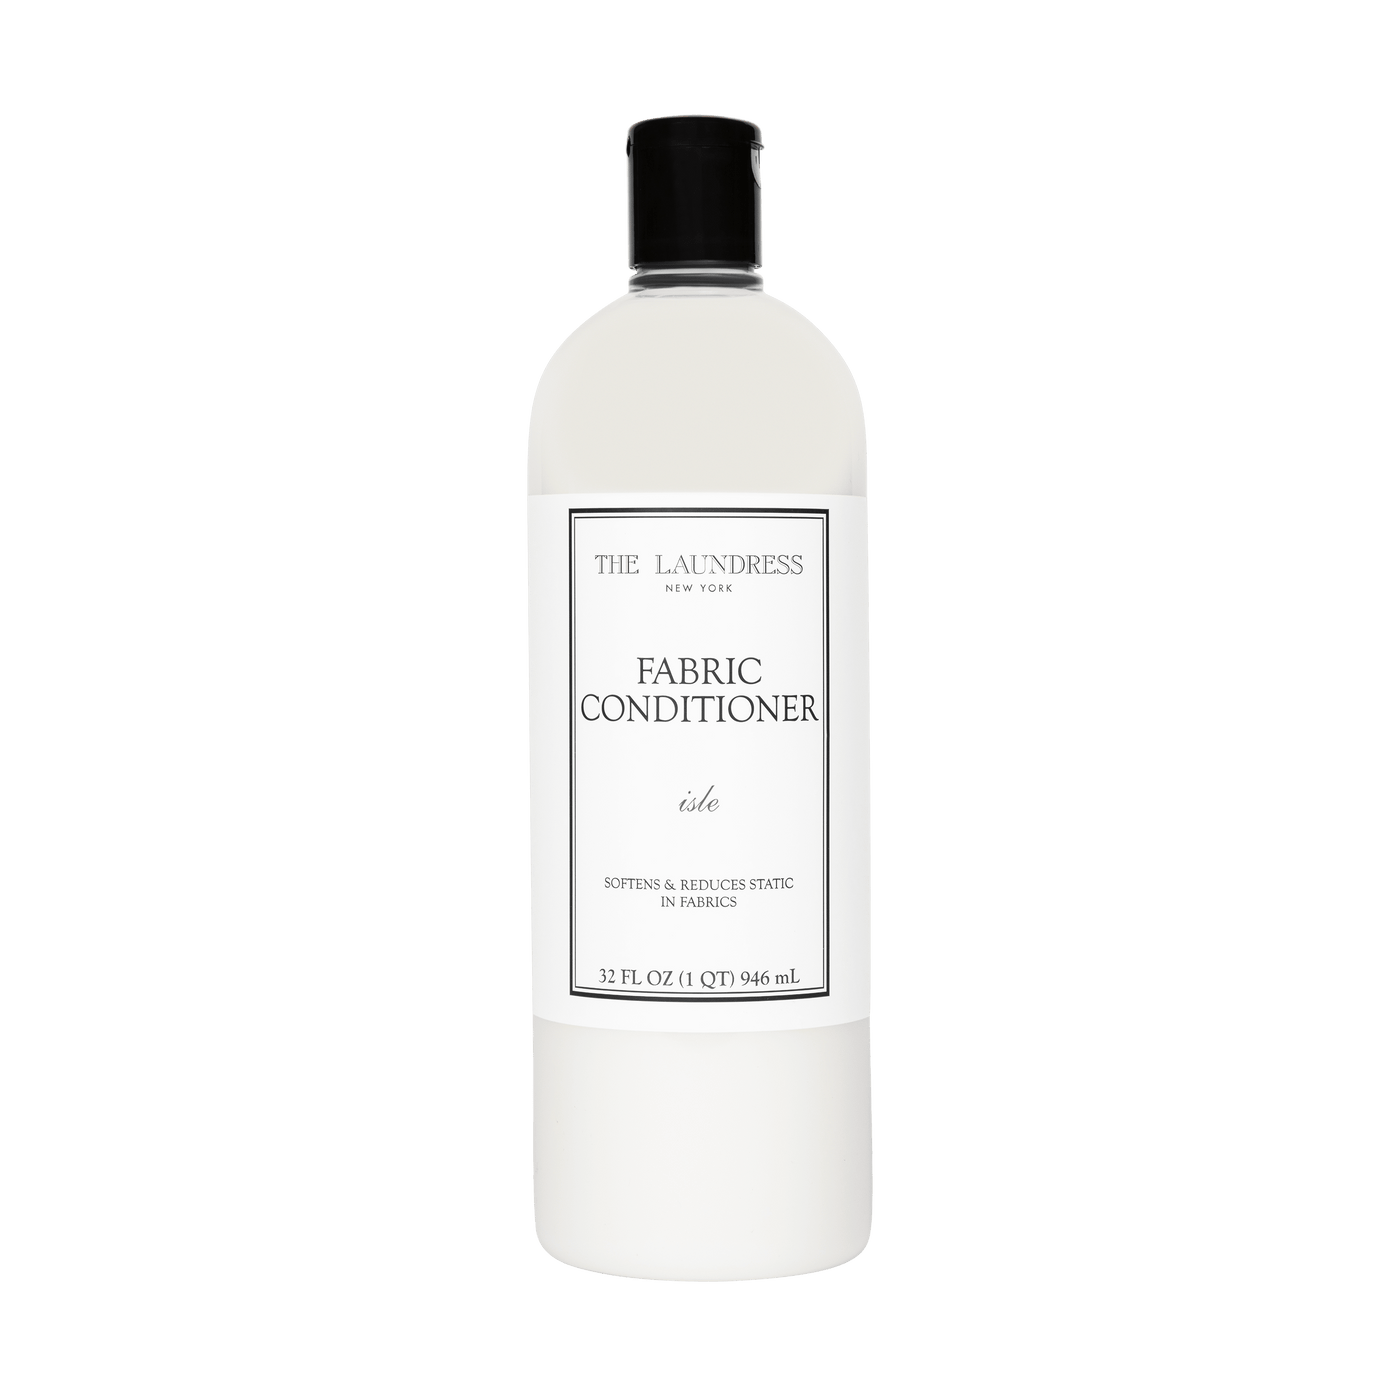 The Laundress coastal-scented Fabric Conditioner Isle which softens & reduces static in fabrics.